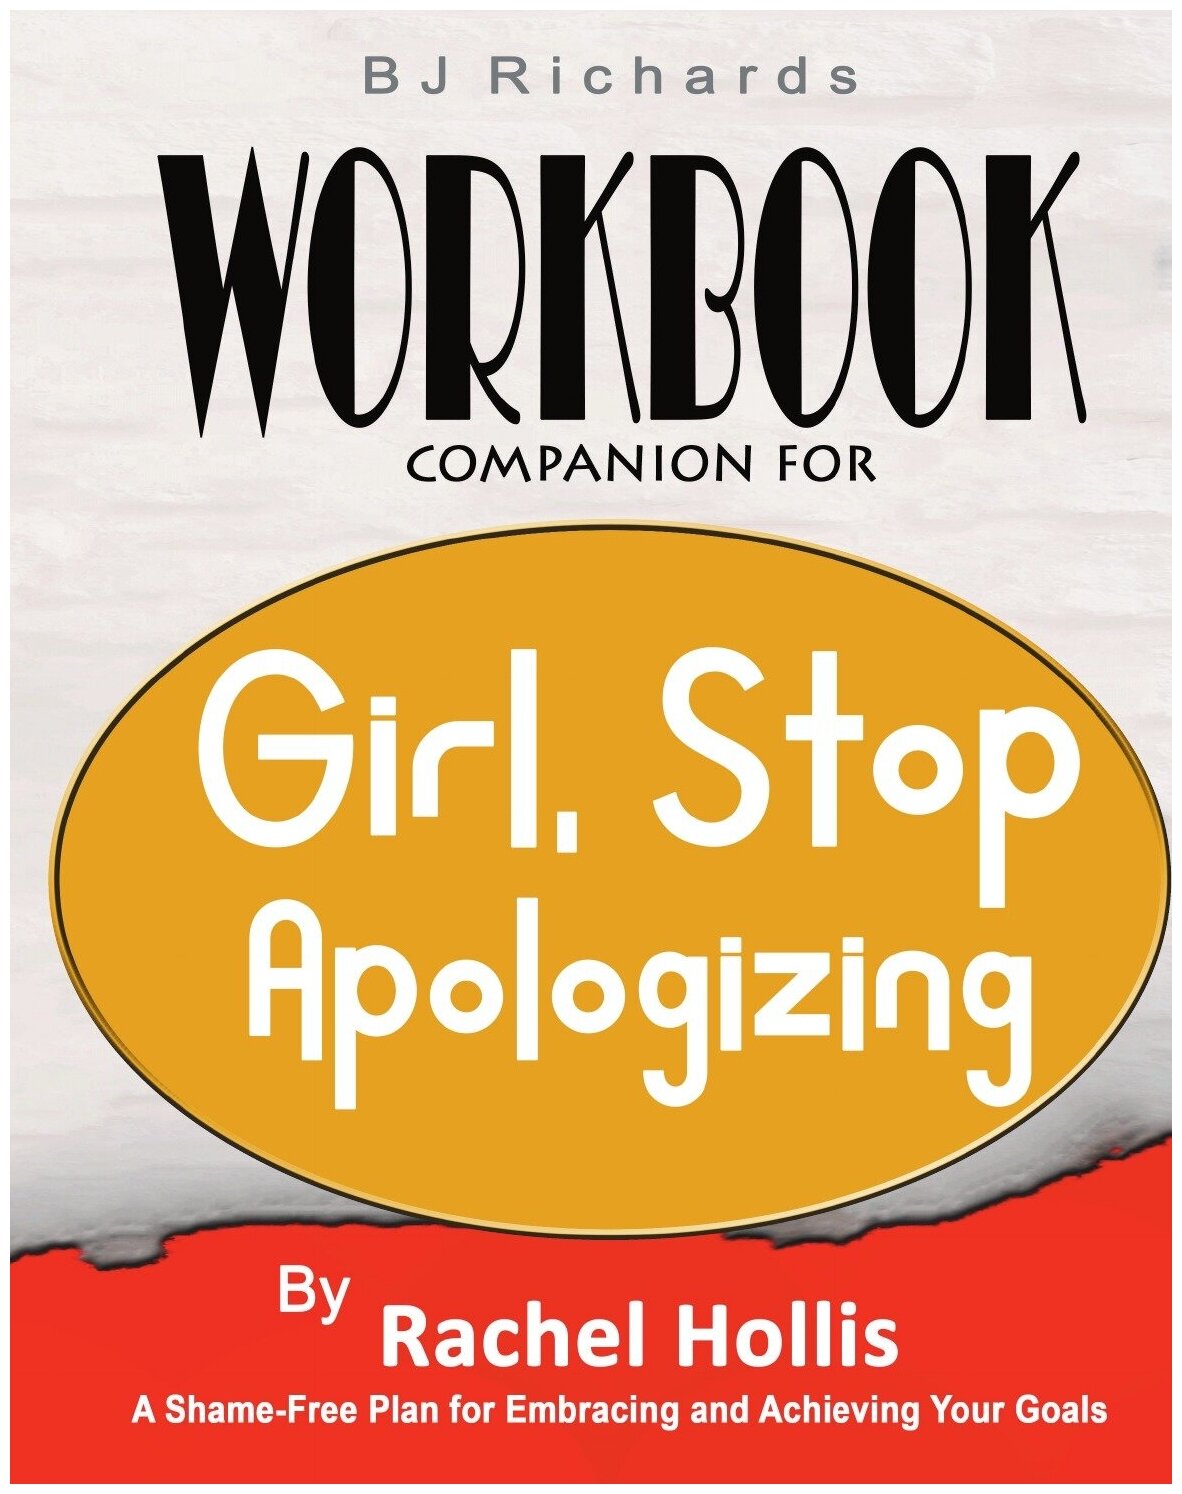 Workbook Companion For Girl Stop Apologizing by Rachel Hollis. A Shame-Free Plan for Embracing and Achieving Your Goals